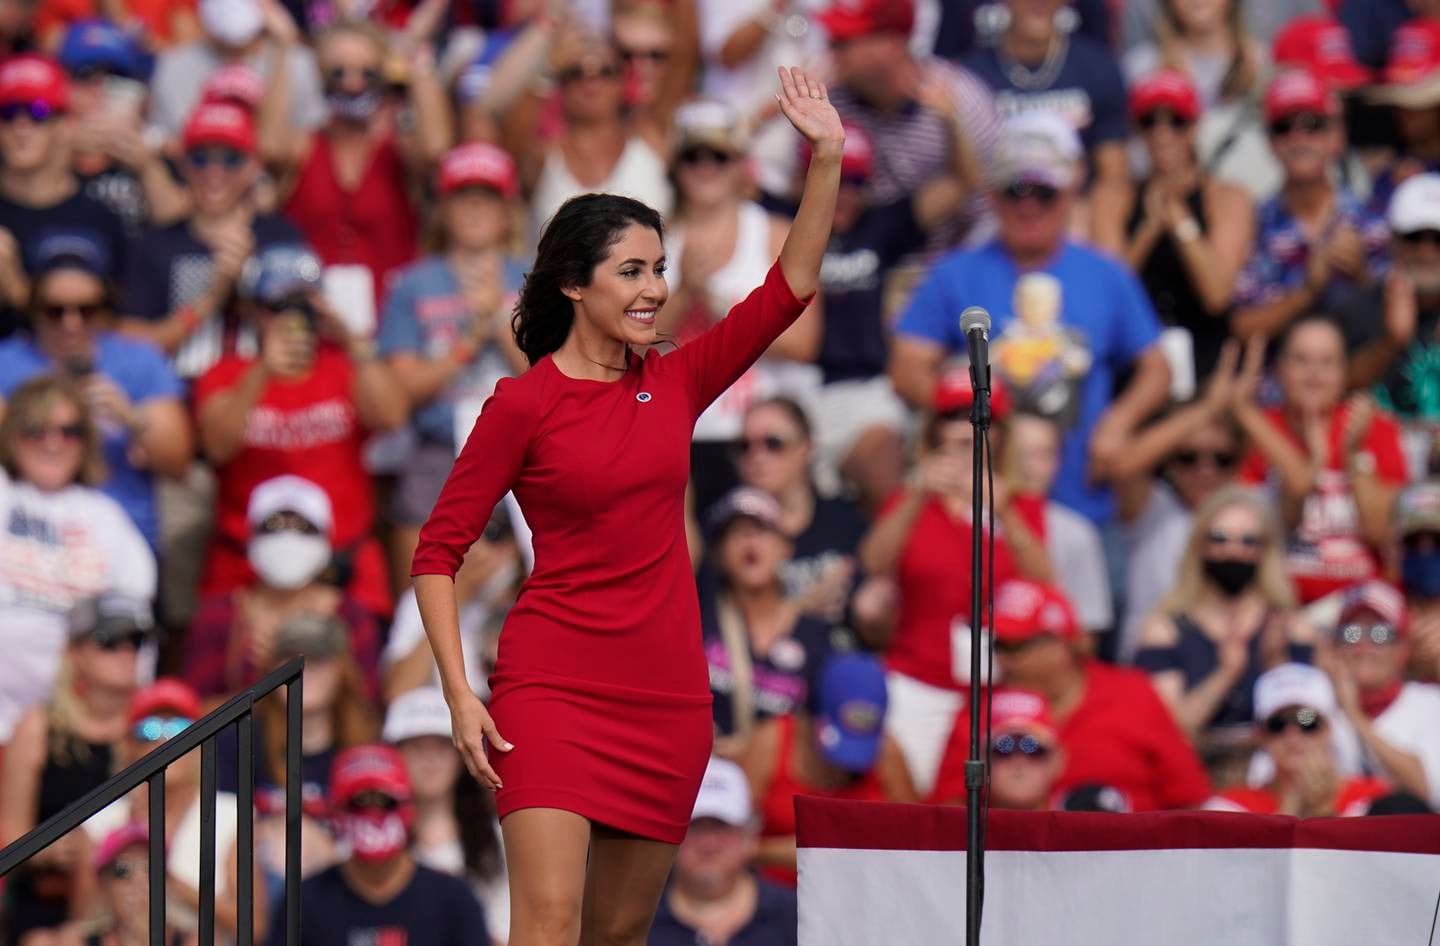 This Oct. 29, 2020 photo shows Anna Paulina Luna, Republican candidate for U.S. House of Representatives waves before President Donald Trump, and First Lady Melania Trump speak at a campaign rally in Tampa, Fla.  Court papers show that Luna is seeking a retraining order against William Braddock whom she accuses of stalking her and wanting her dead. Braddock denies the claims and wants to see any evidence against him. A Pinellas County judge on Tuesday, June 22, 2021,  agreed to delay the matter until July 9.(AP Photo/Chris O'Meara)